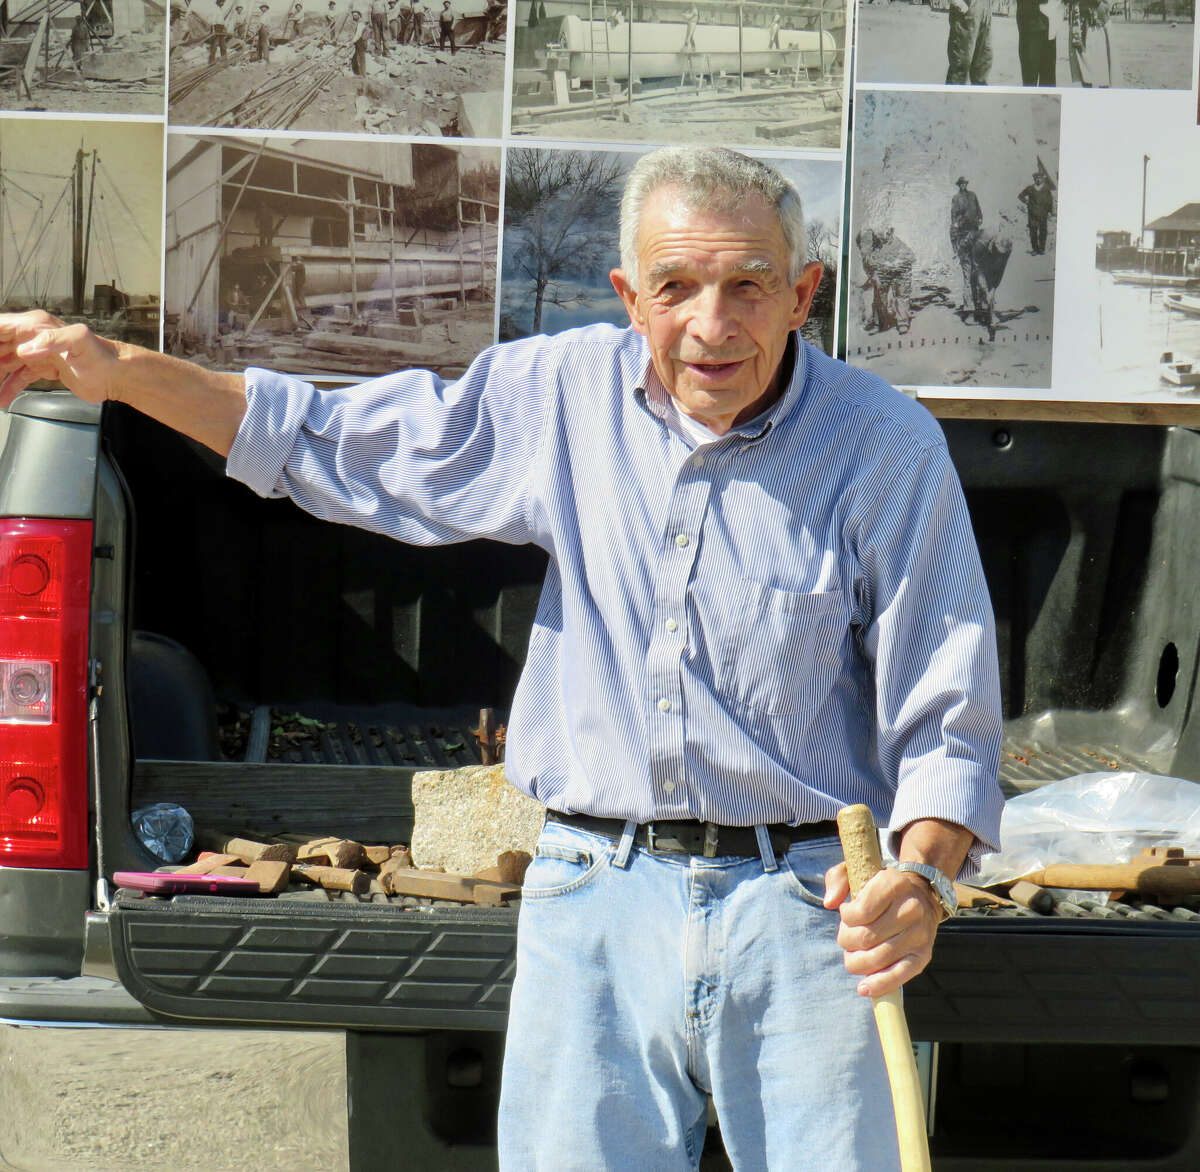 Unk DaRos at Stony Creek Quarry at a recent talk sponsored by Shoreline Village CT.